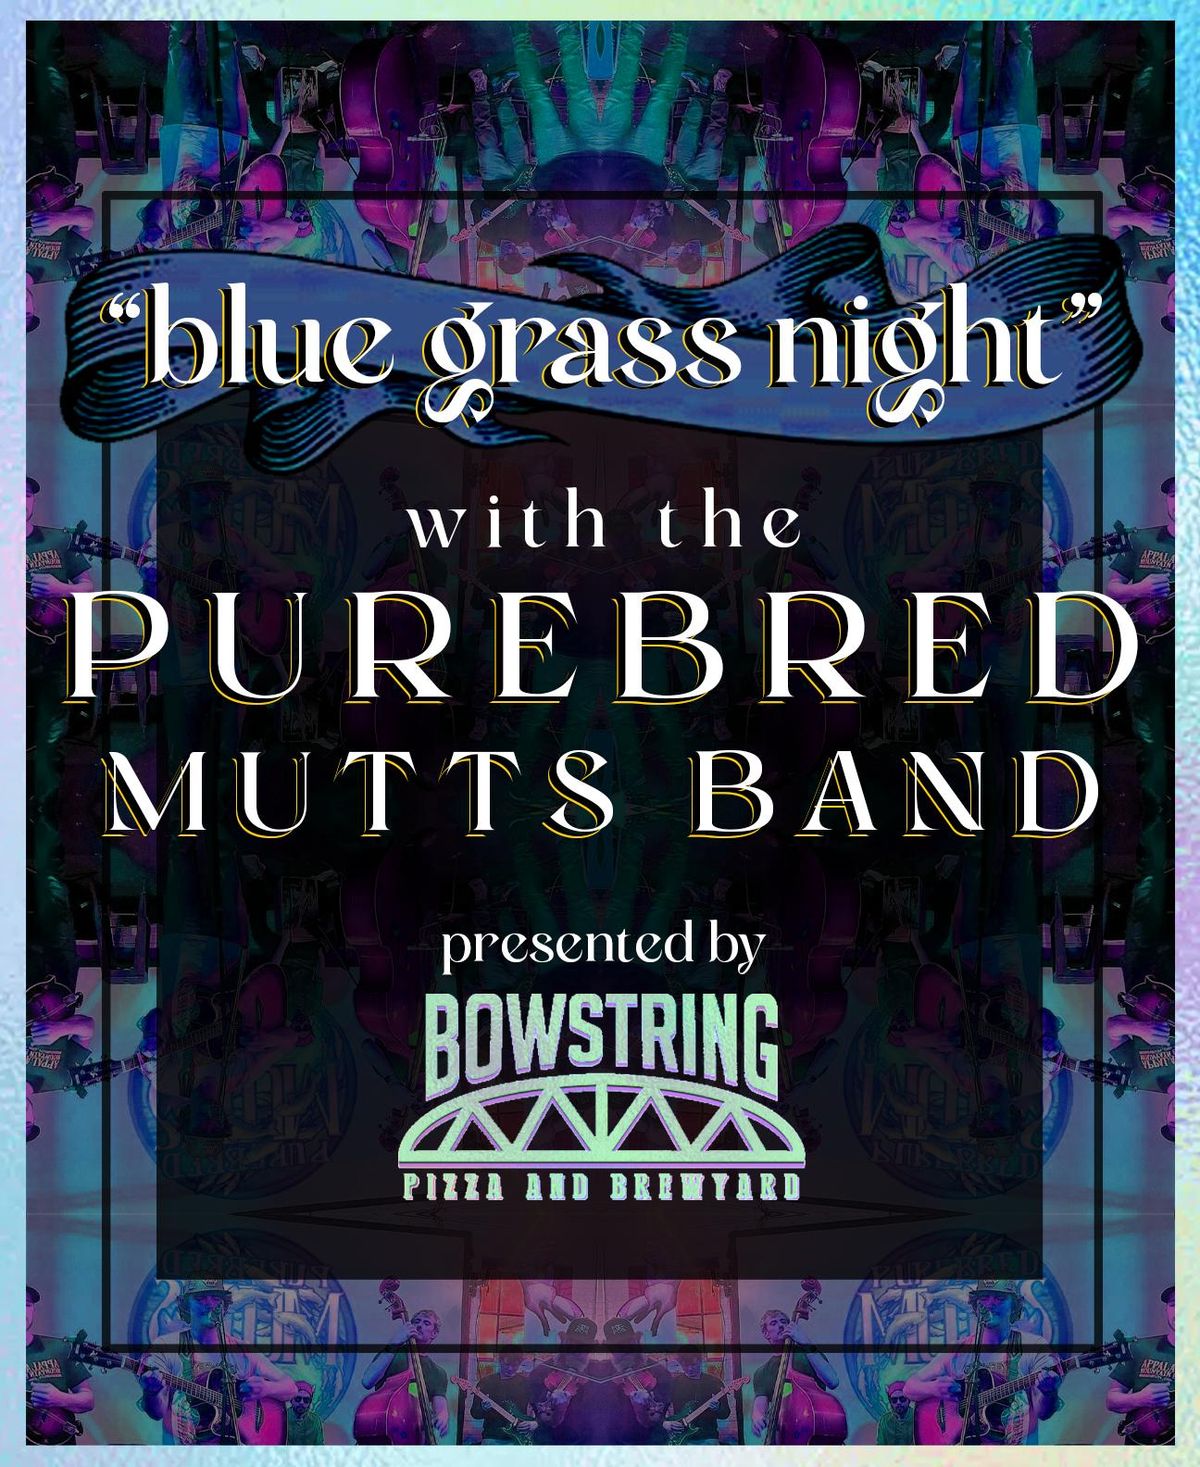 "Bluegrass Night" with the Purebred Mutts Band! - Bowstring Pizza & Brewyard Raleigh